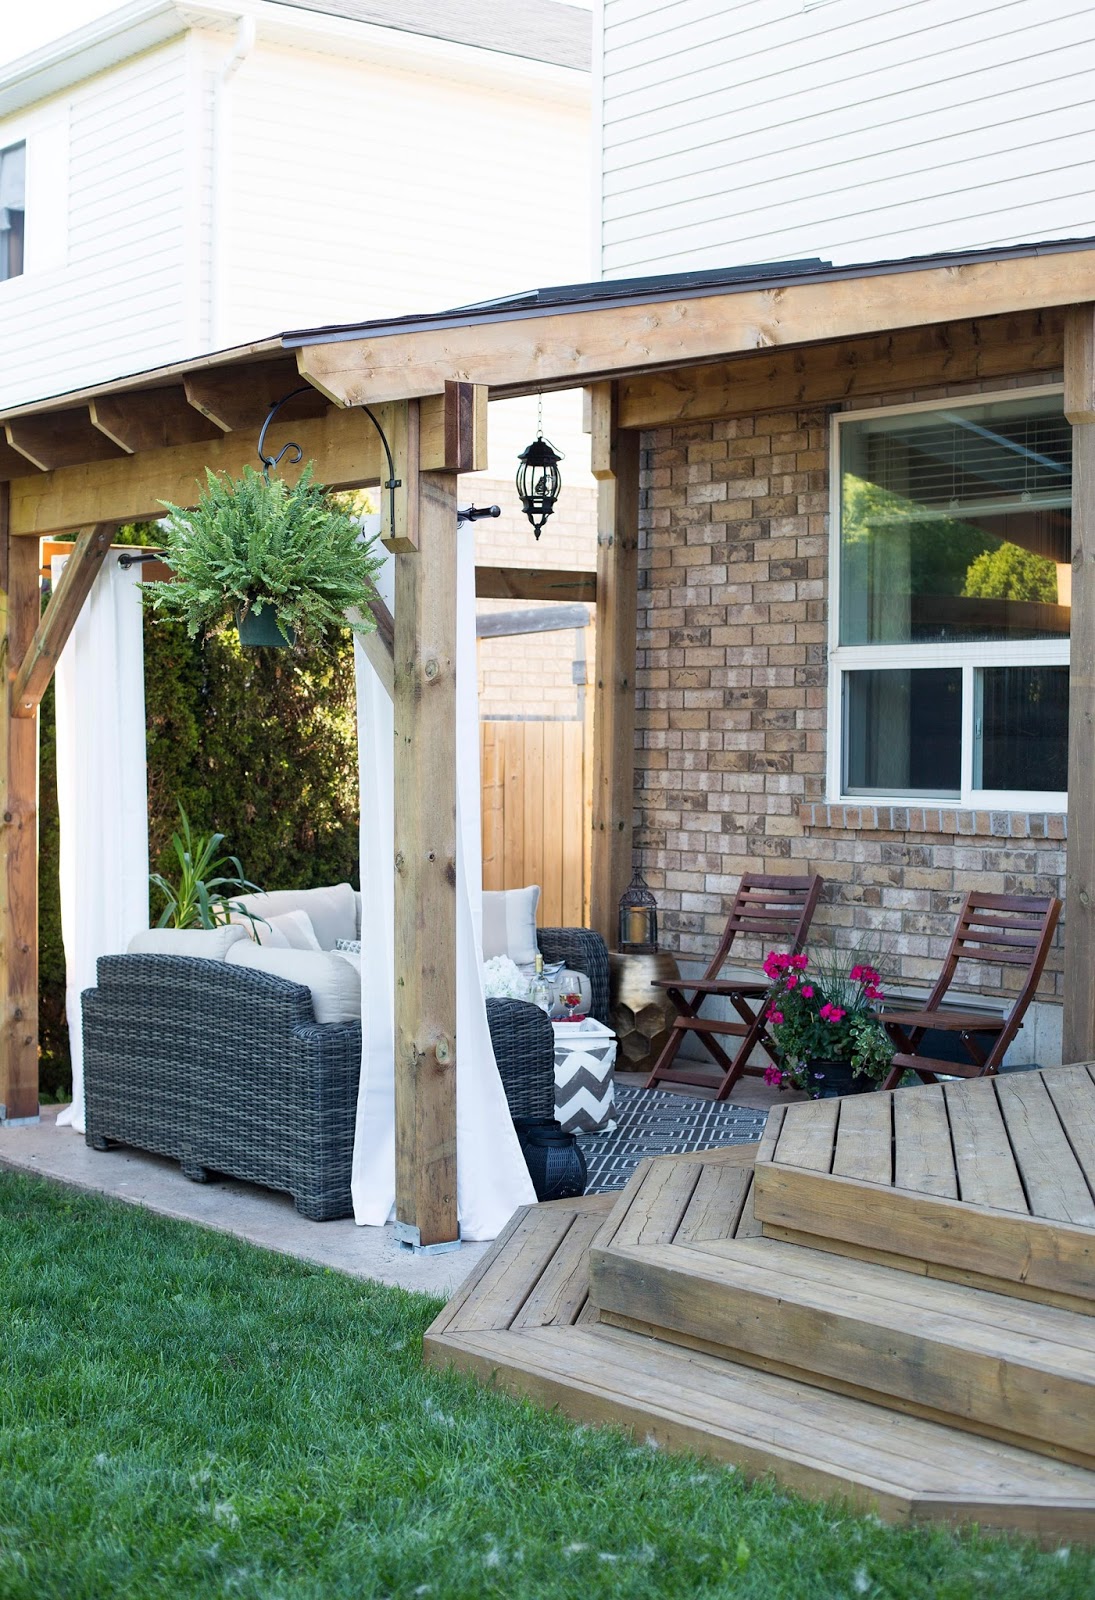 Hdblogsquad // How To Build A Covered Patio • Brittany Stager